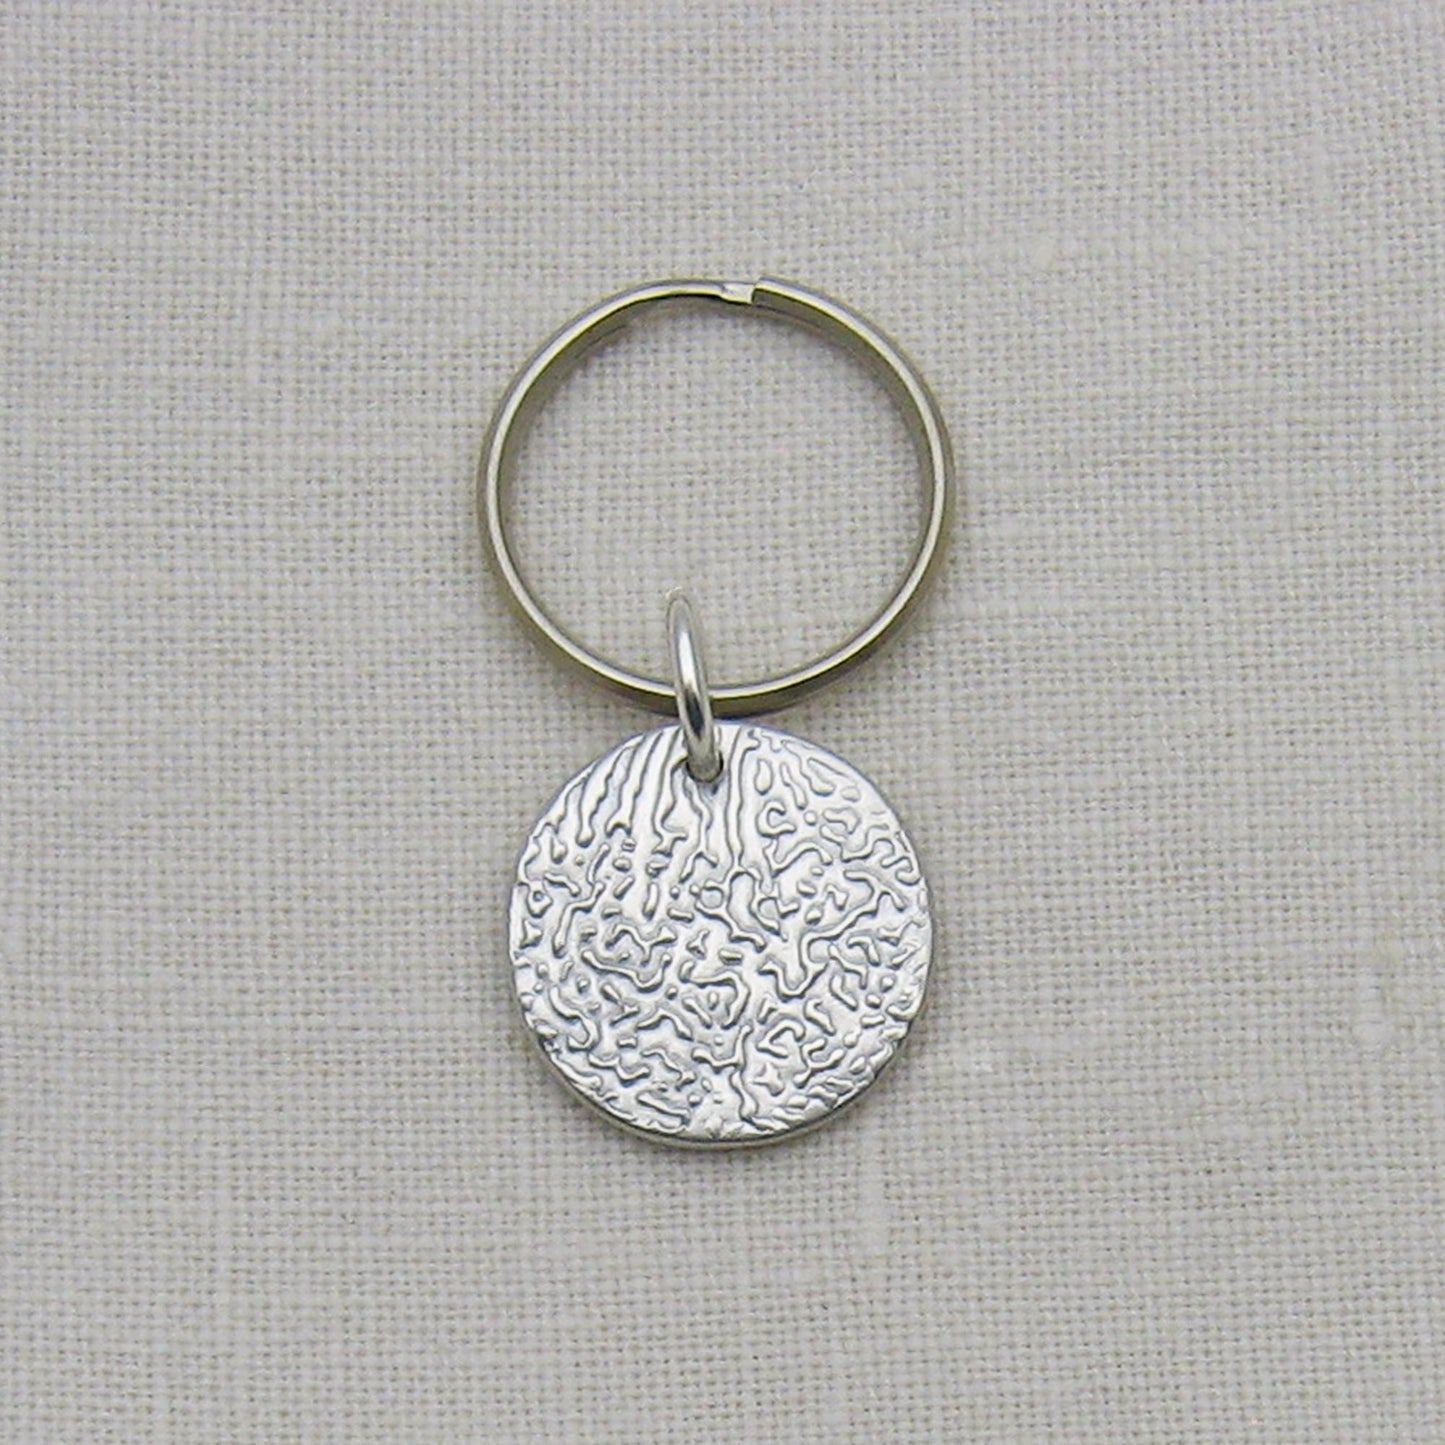 Dog Nose Textured Circle Keychain Shown as an example of textured pendant and all silver